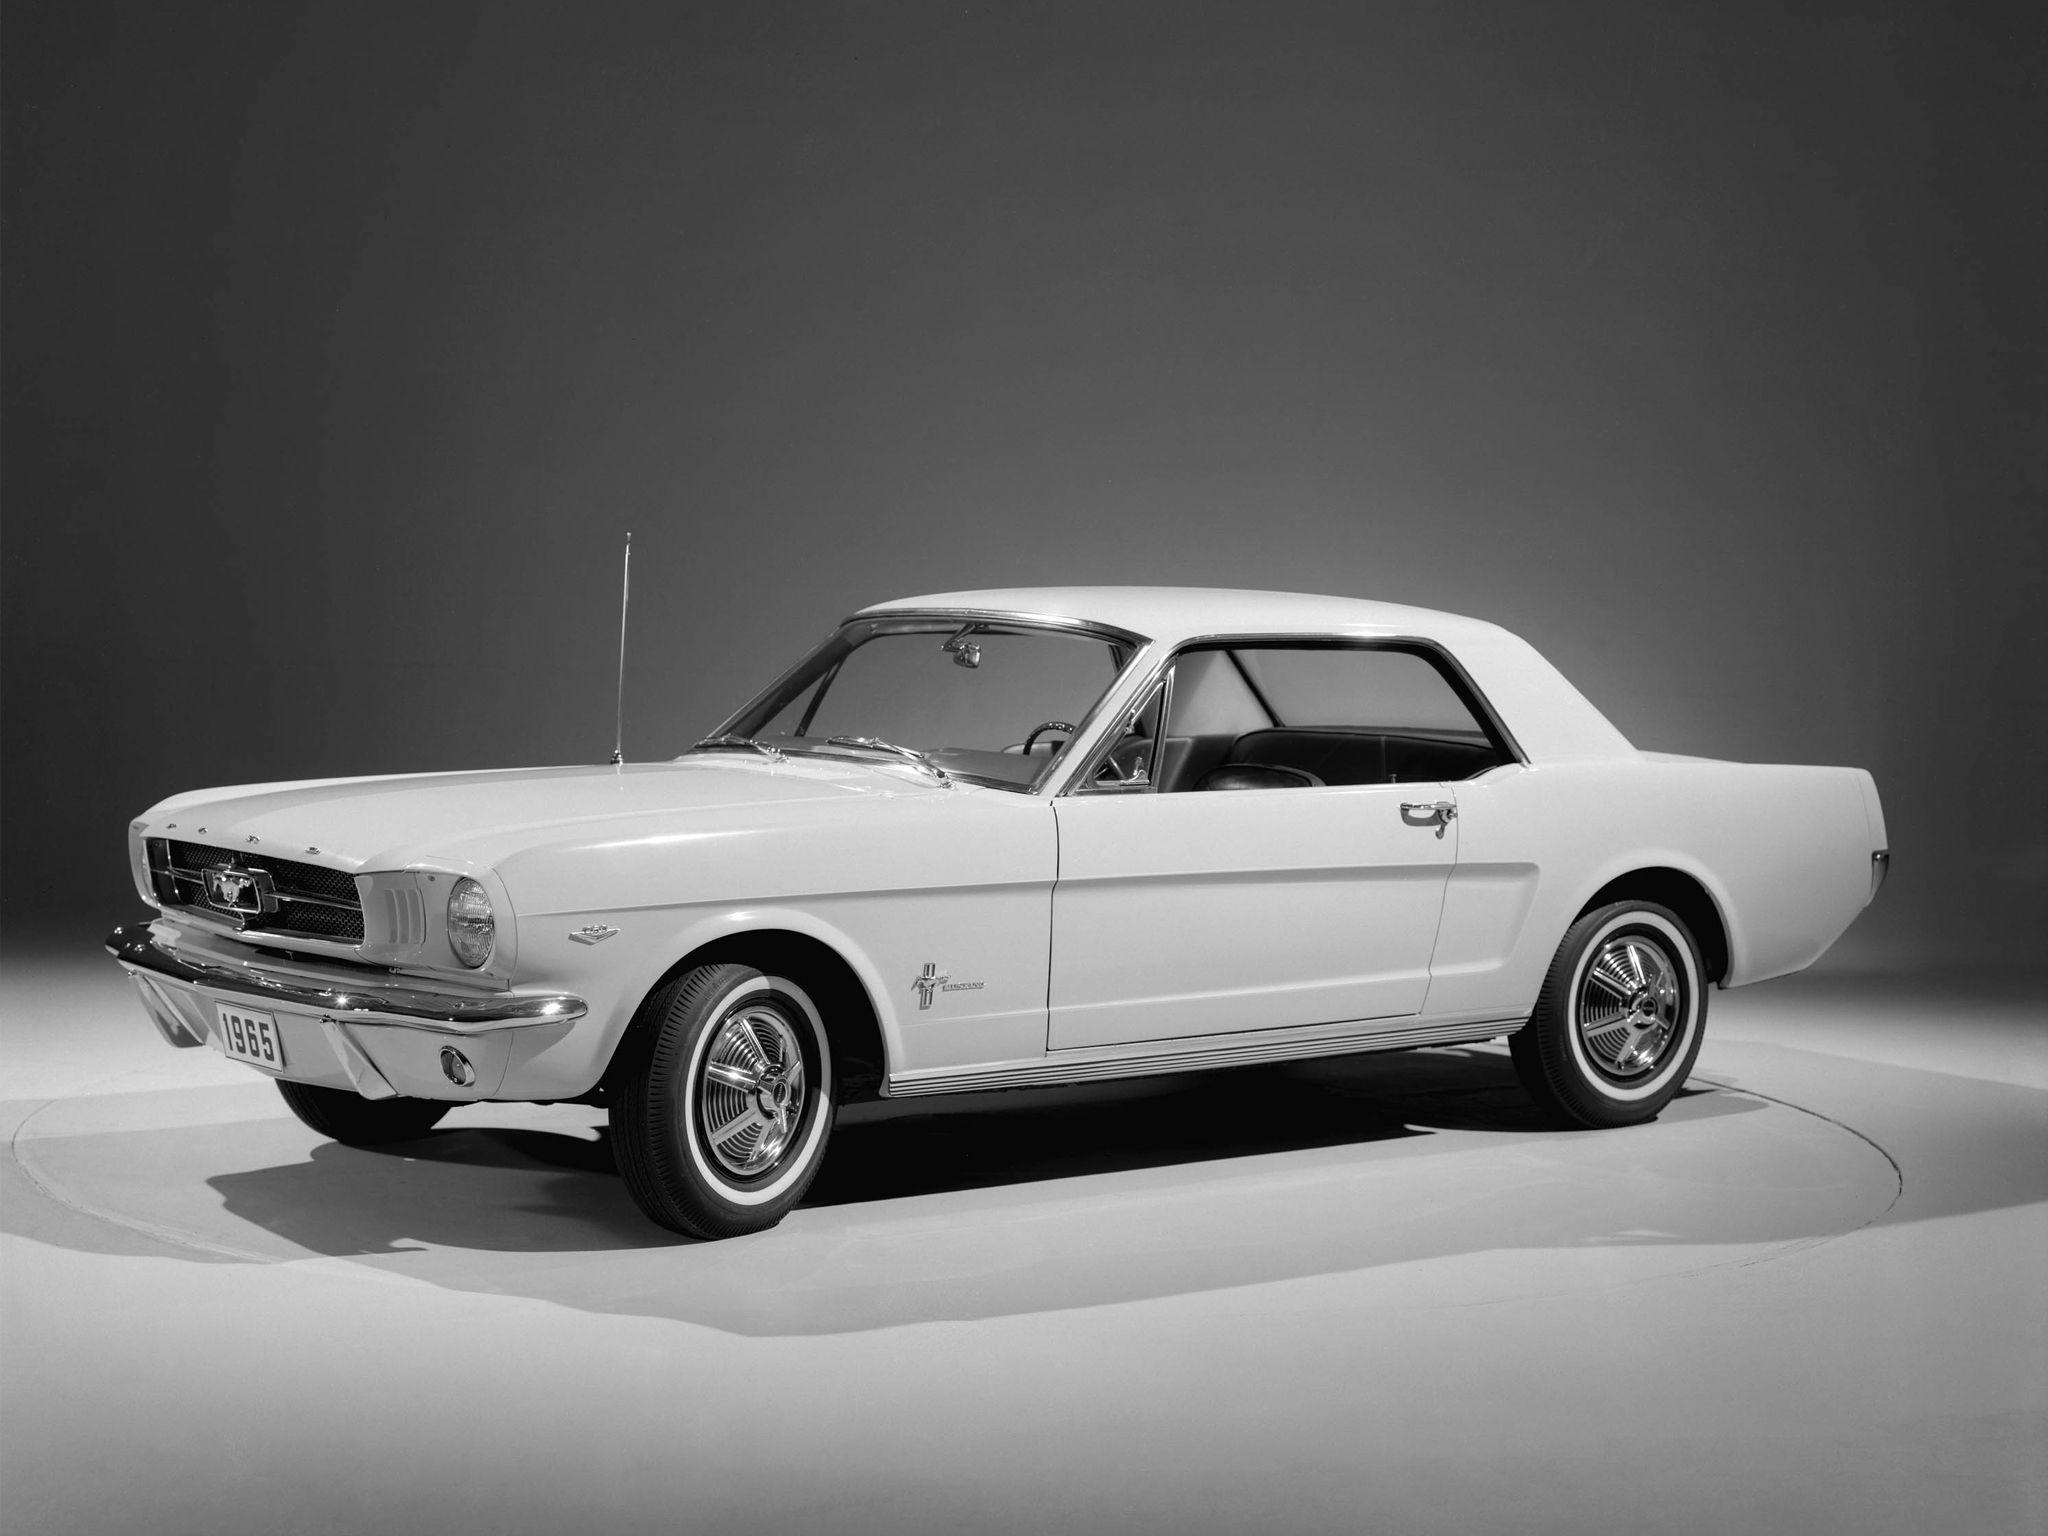 Ford Mustang Coupe classic muscle 289 ff wallpaper